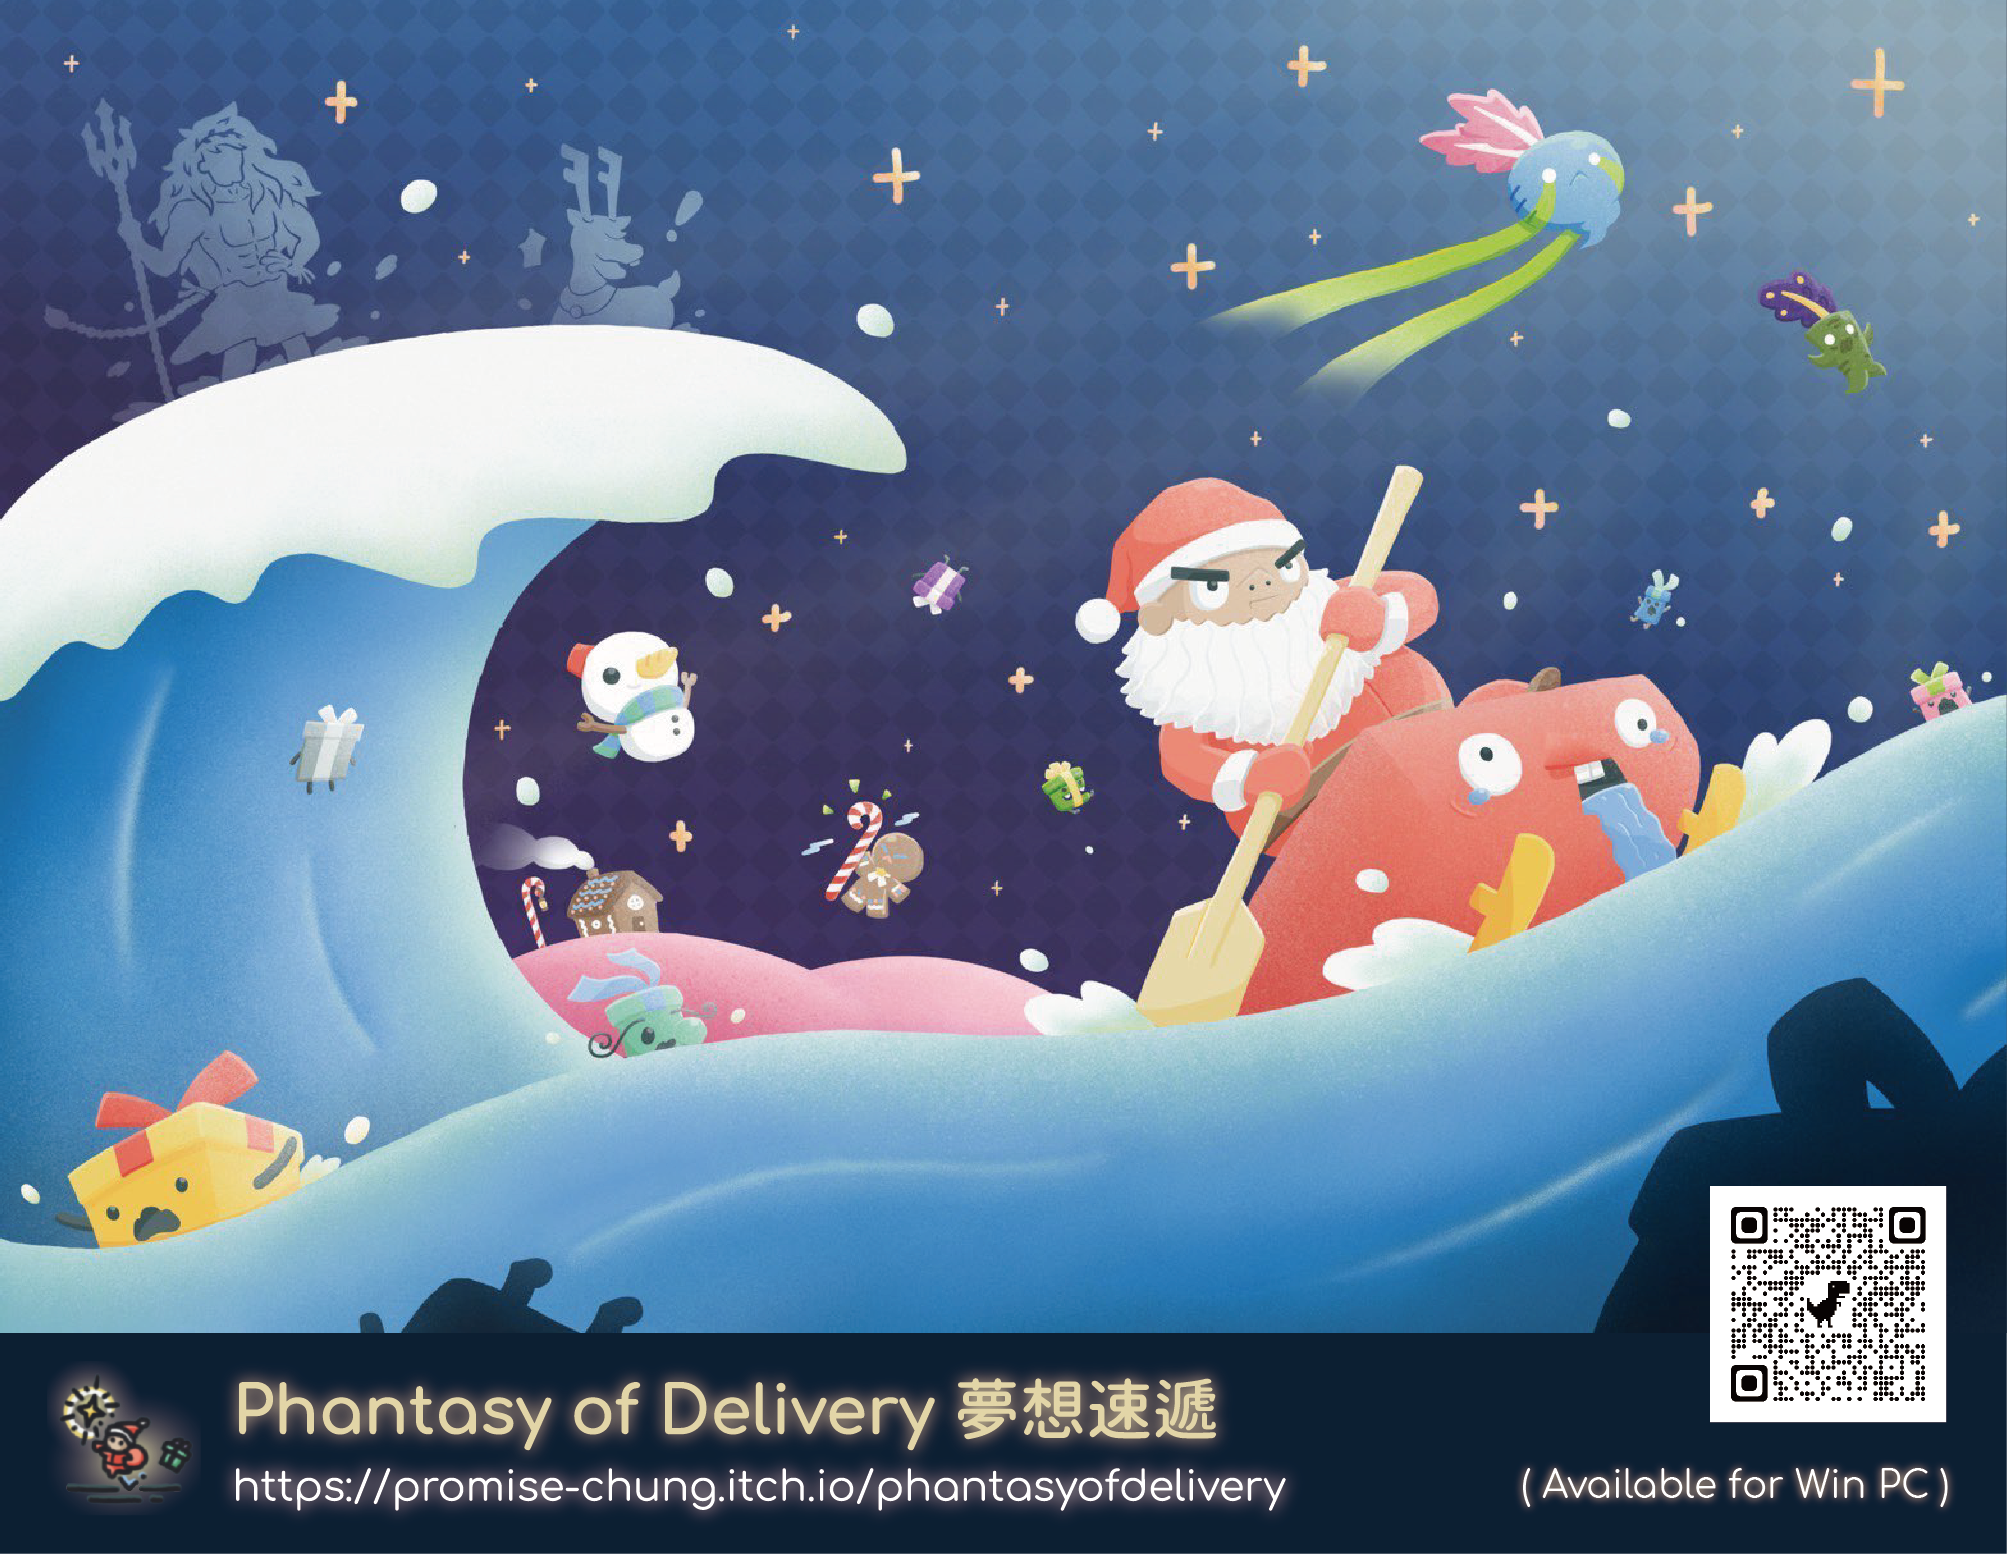 Phantasy of Delivery